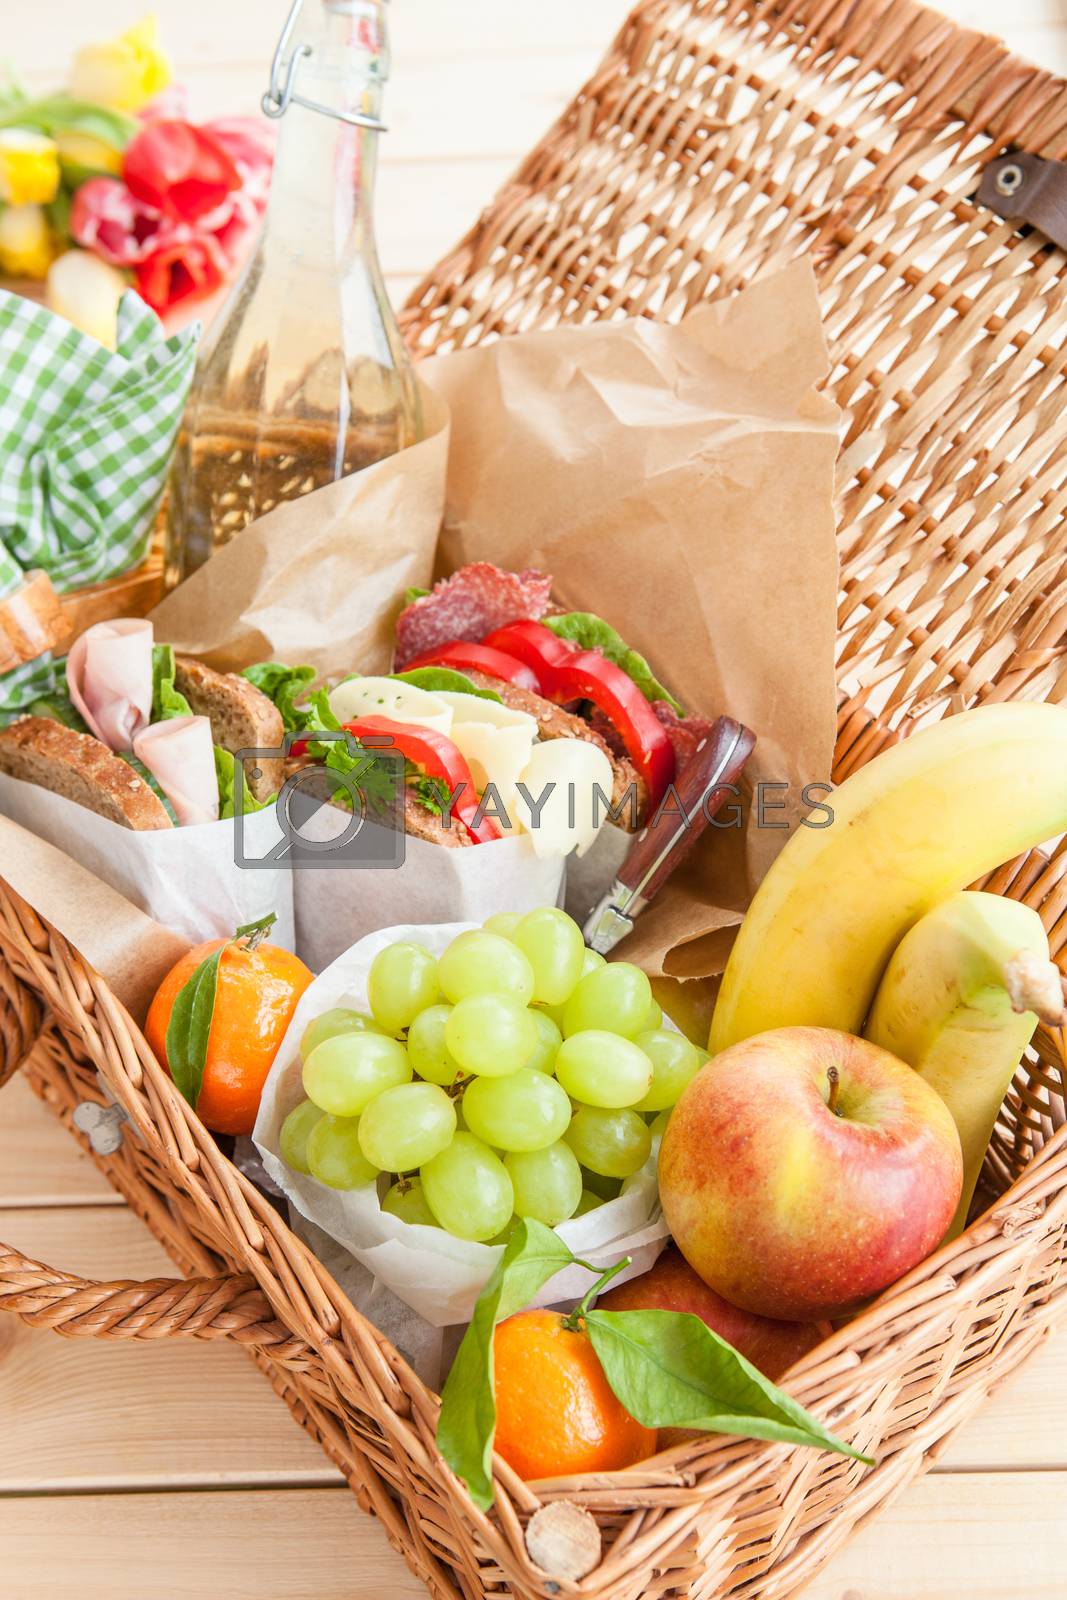 Royalty free image of Filled picnic basket by BarbaraNeveu